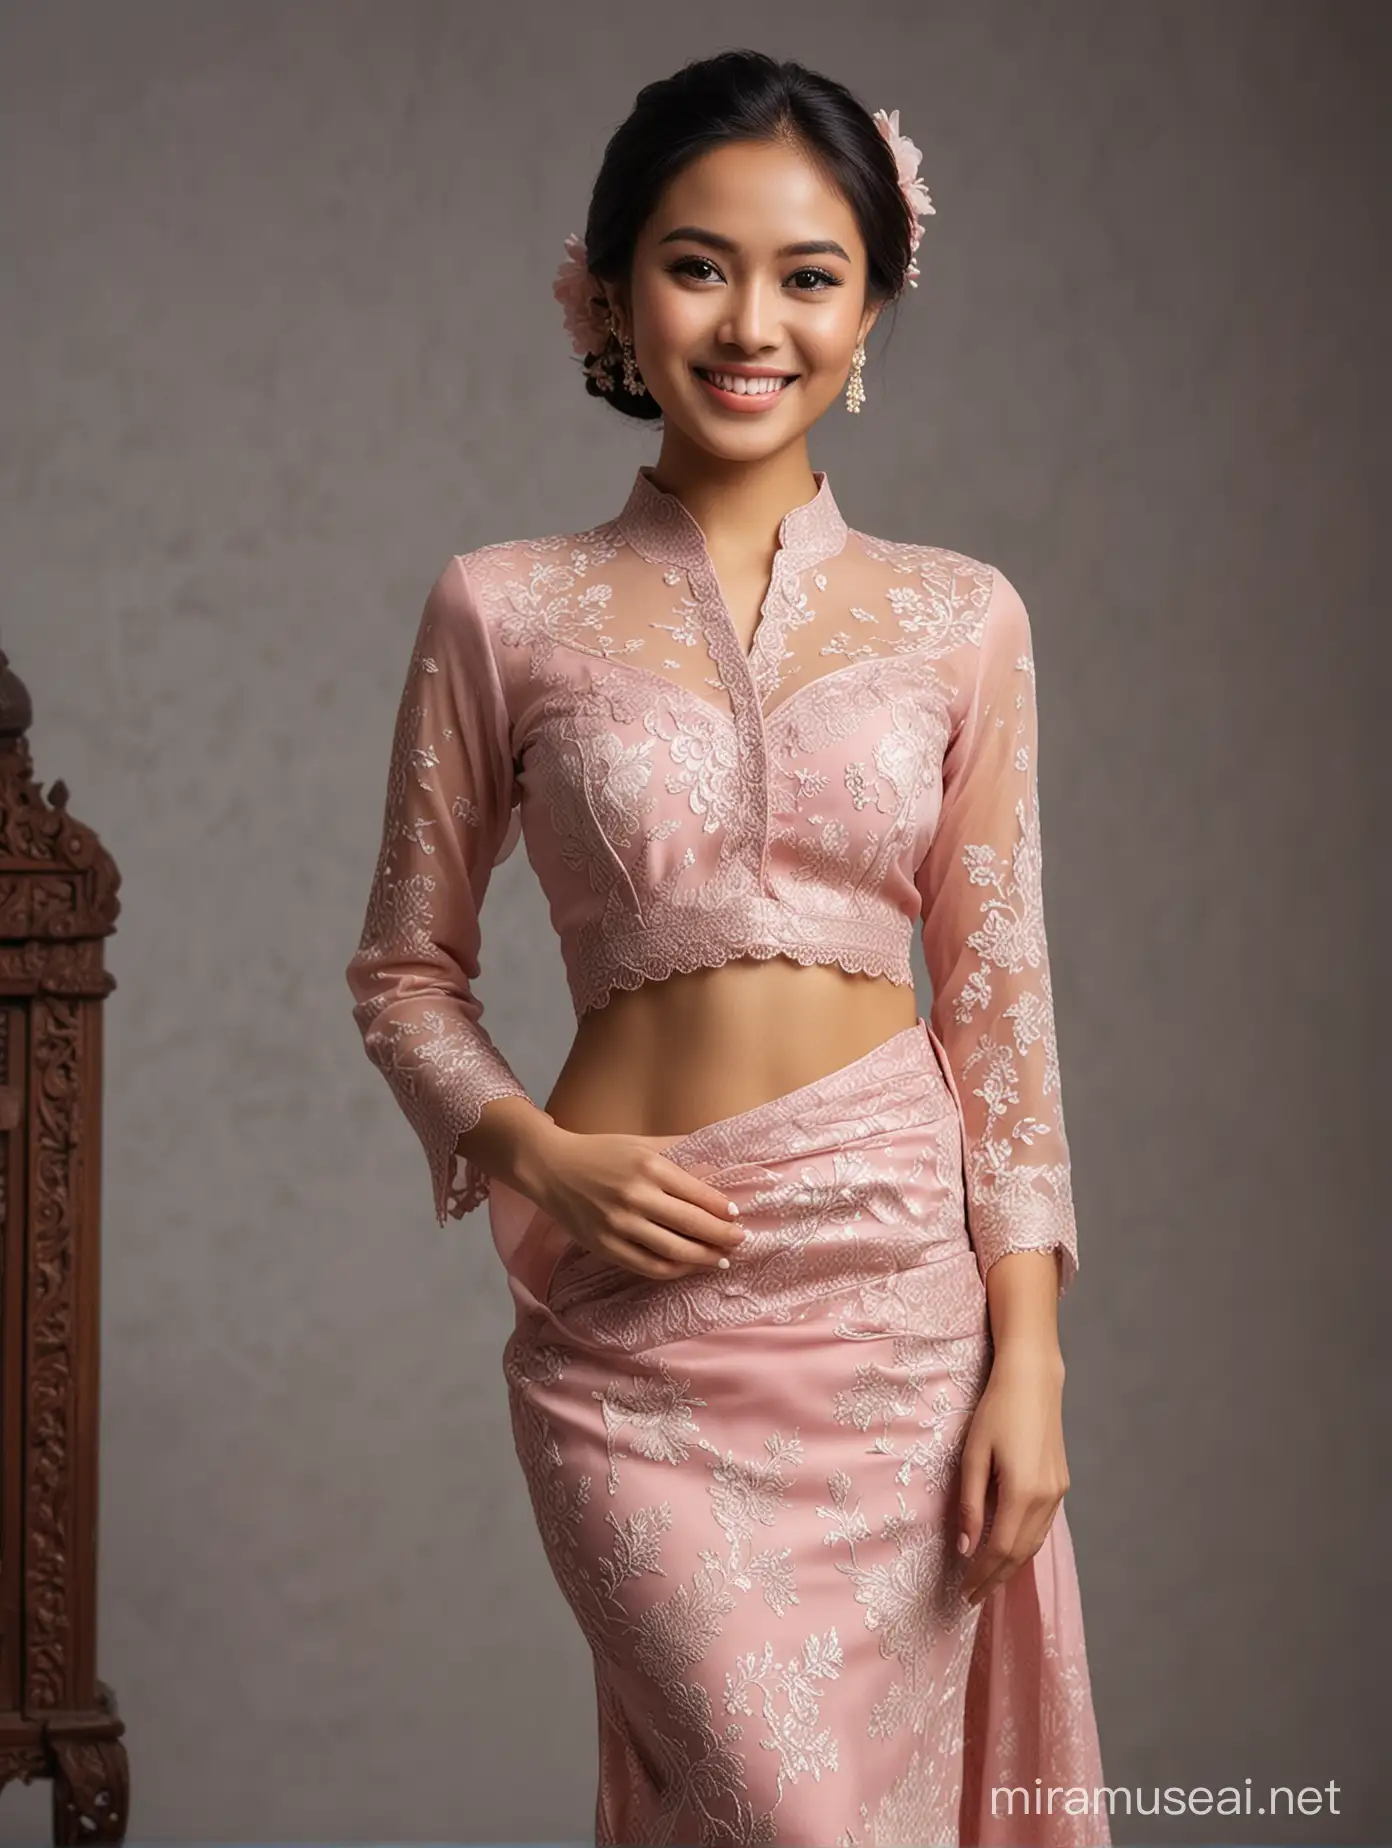 Full body photo of a beautiful 25 year old woman from Indonesia wearing a kebaya and looking real, detailed and clear as a perfect woman, smiling sweetly against the background of Indonesian Kartini Day.